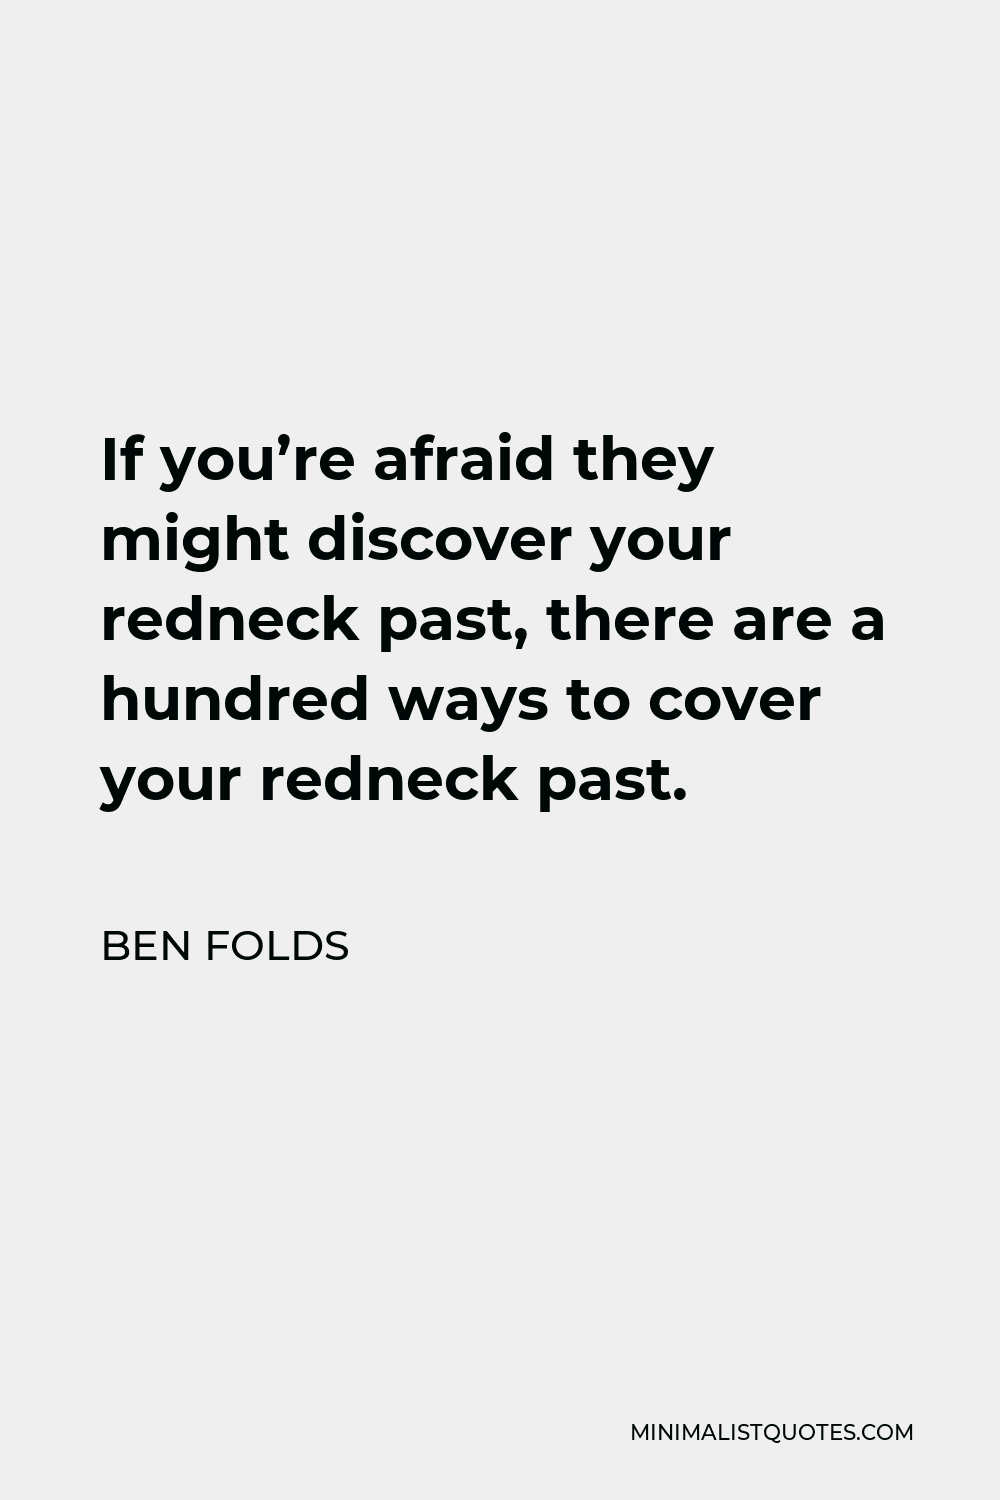 Ben Folds Quote - If you’re afraid they might discover your redneck past, there are a hundred ways to cover your redneck past.